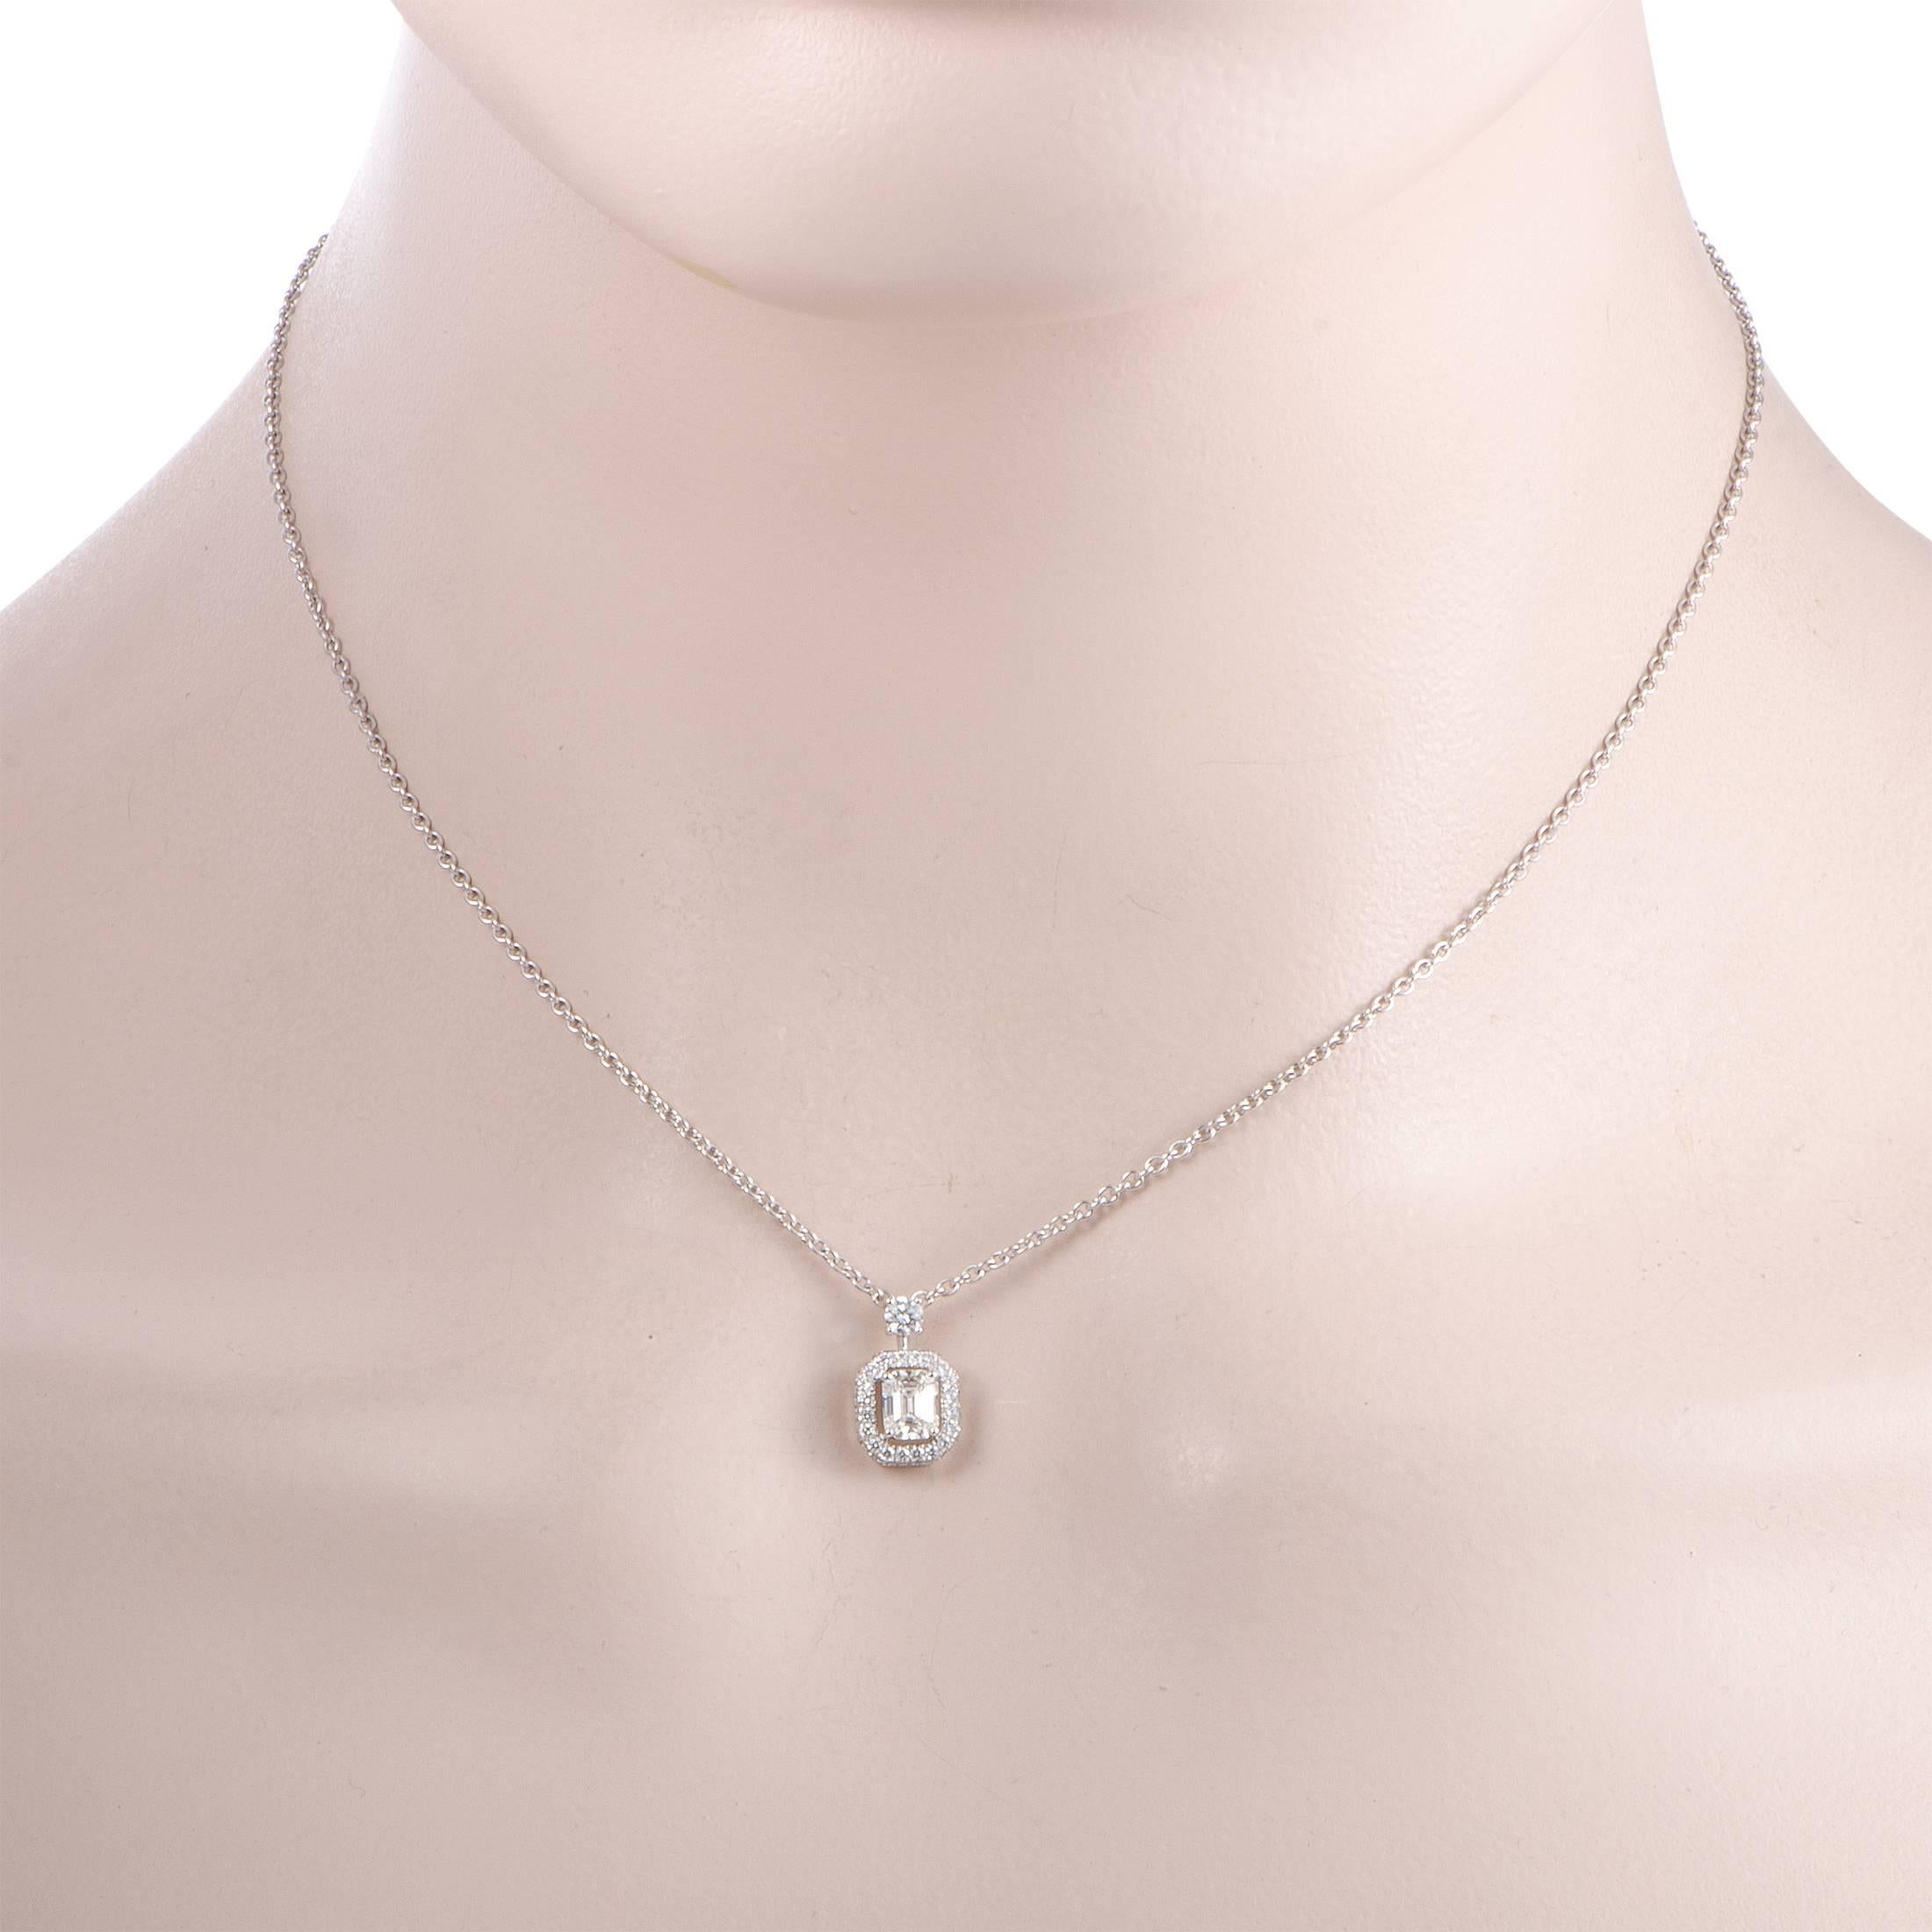 Featuring an incredibly classy design, this gorgeous 18K white gold necklace from Graff exudes elegance and refinement. The necklace features a pendant set with a nearly colorless (grade G) diamond of VS1 clarity that weighs 0.60 carats, while the